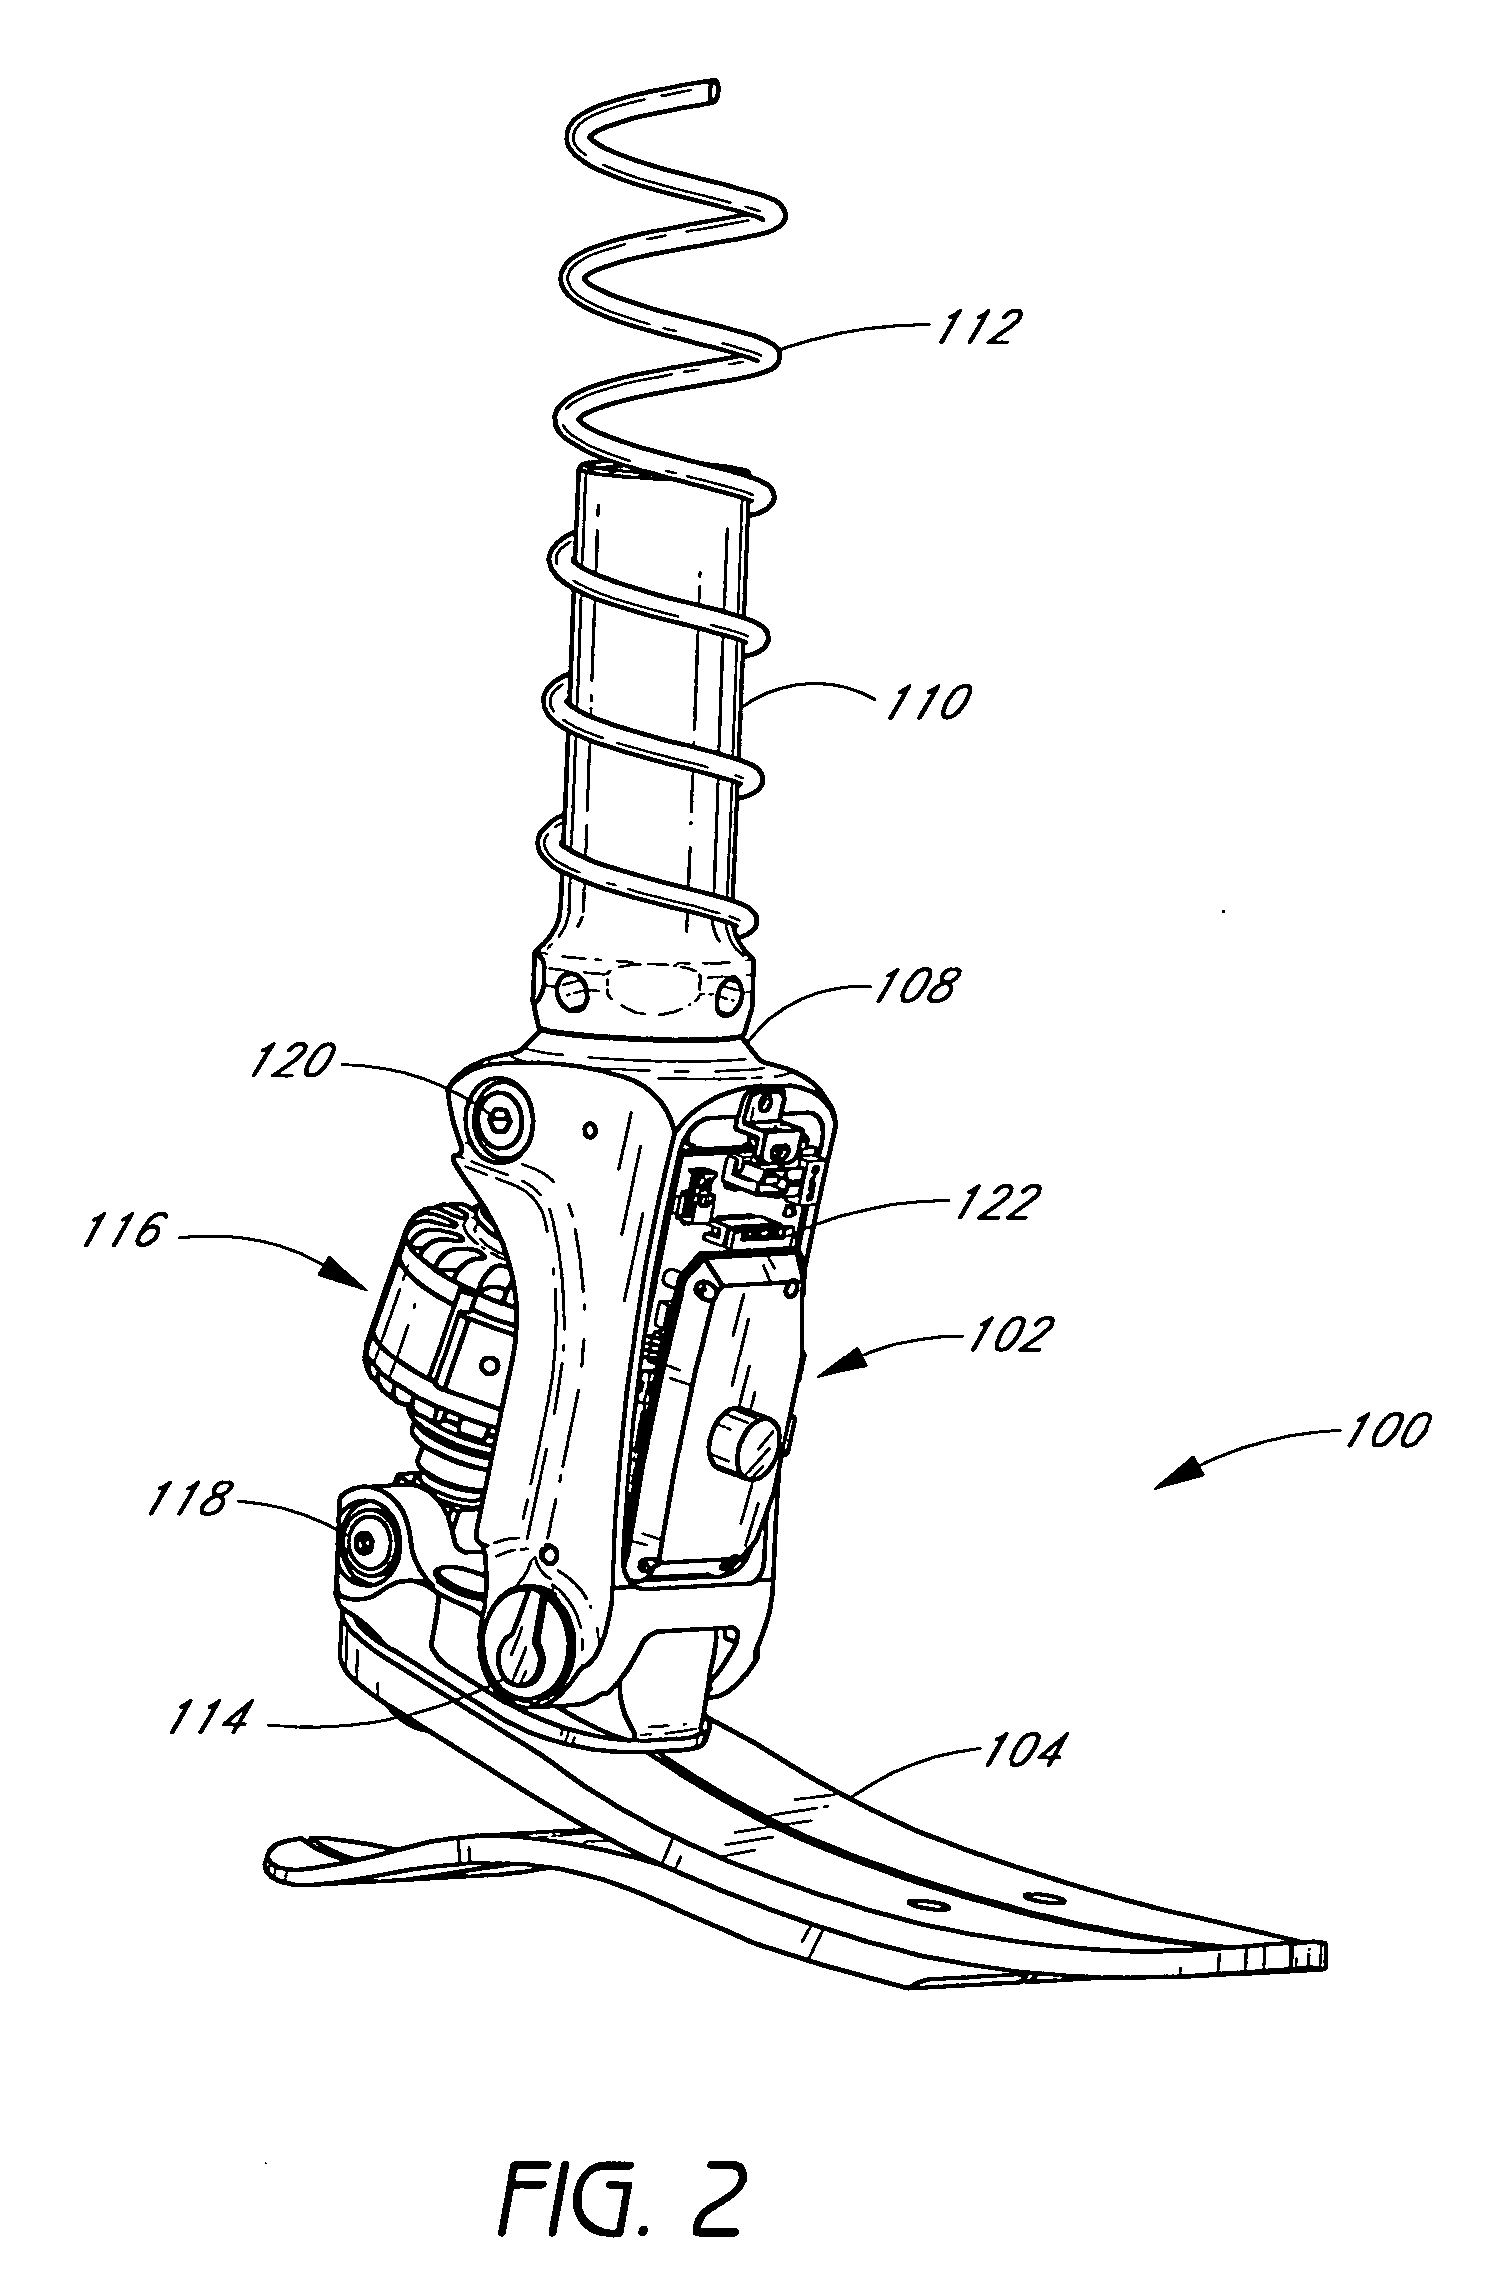 Systems and methods for actuating a prosthetic ankle based on a relaxed position